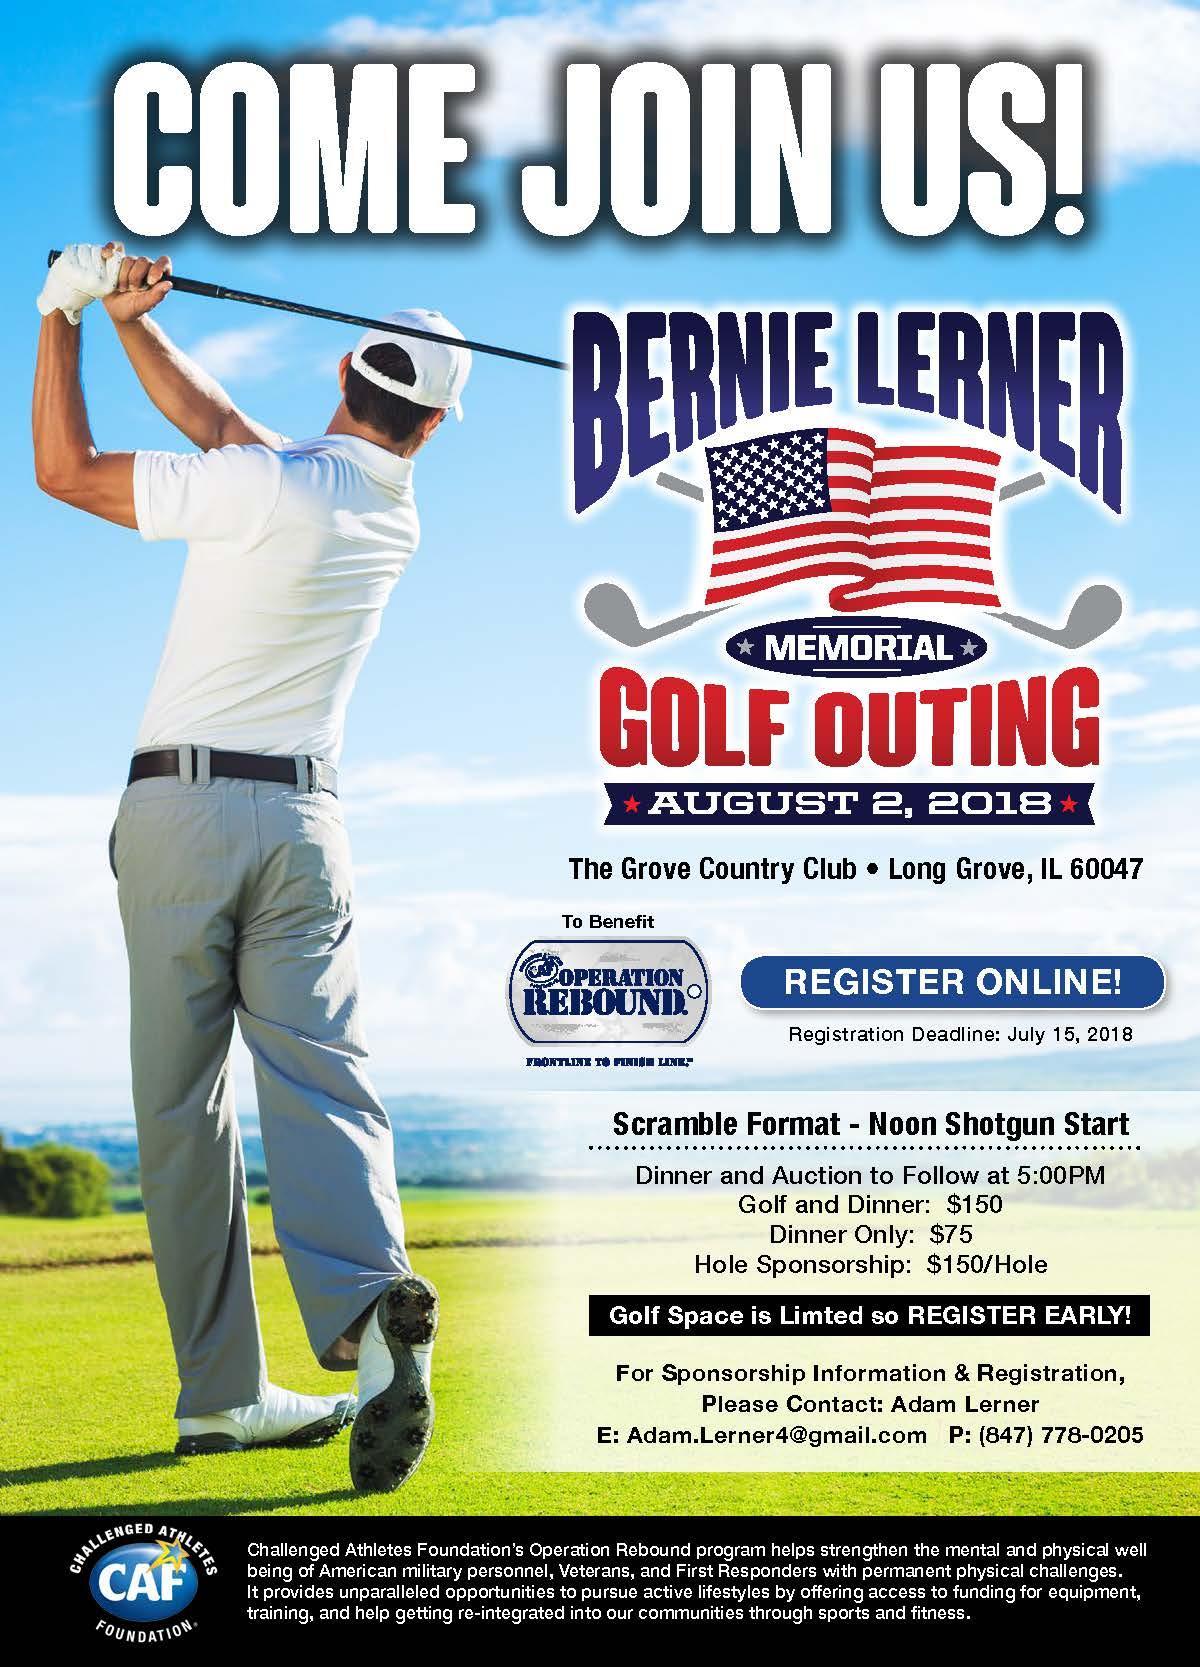 3rd Annual Bernie Lerner Memorial Golf Outing and Dinner with Silent Auction